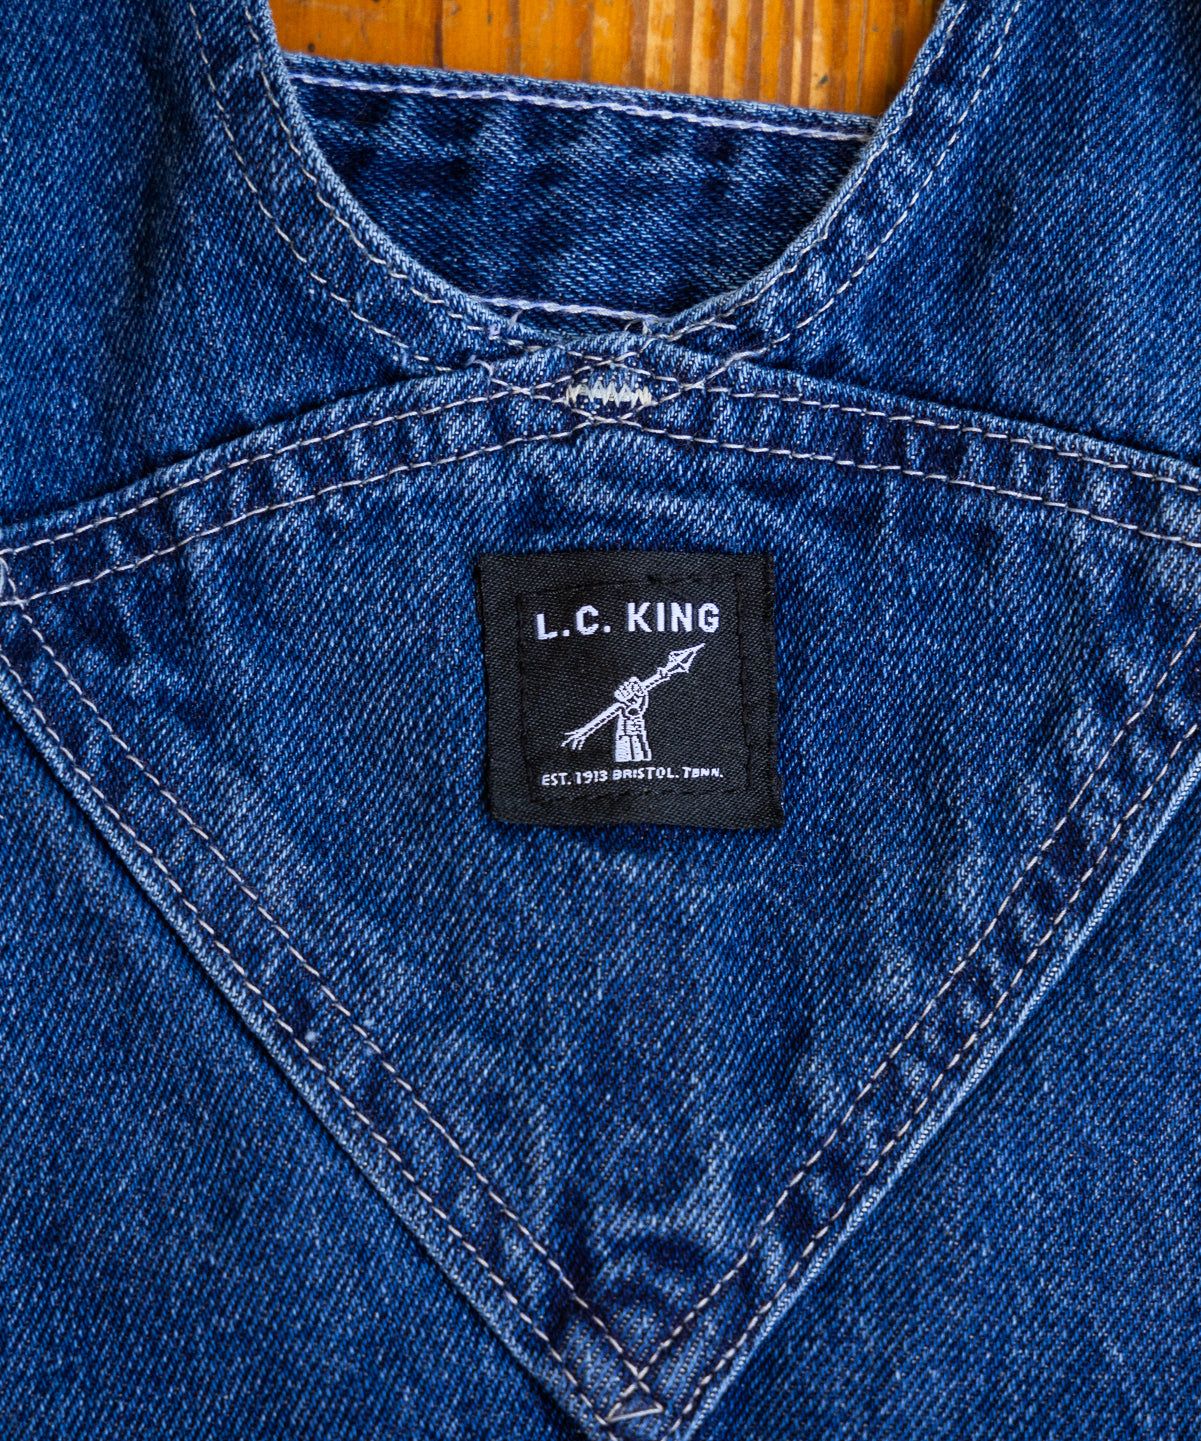 Sizing Info for LC King Jeans, Coats, Overalls, and Shirts – LC